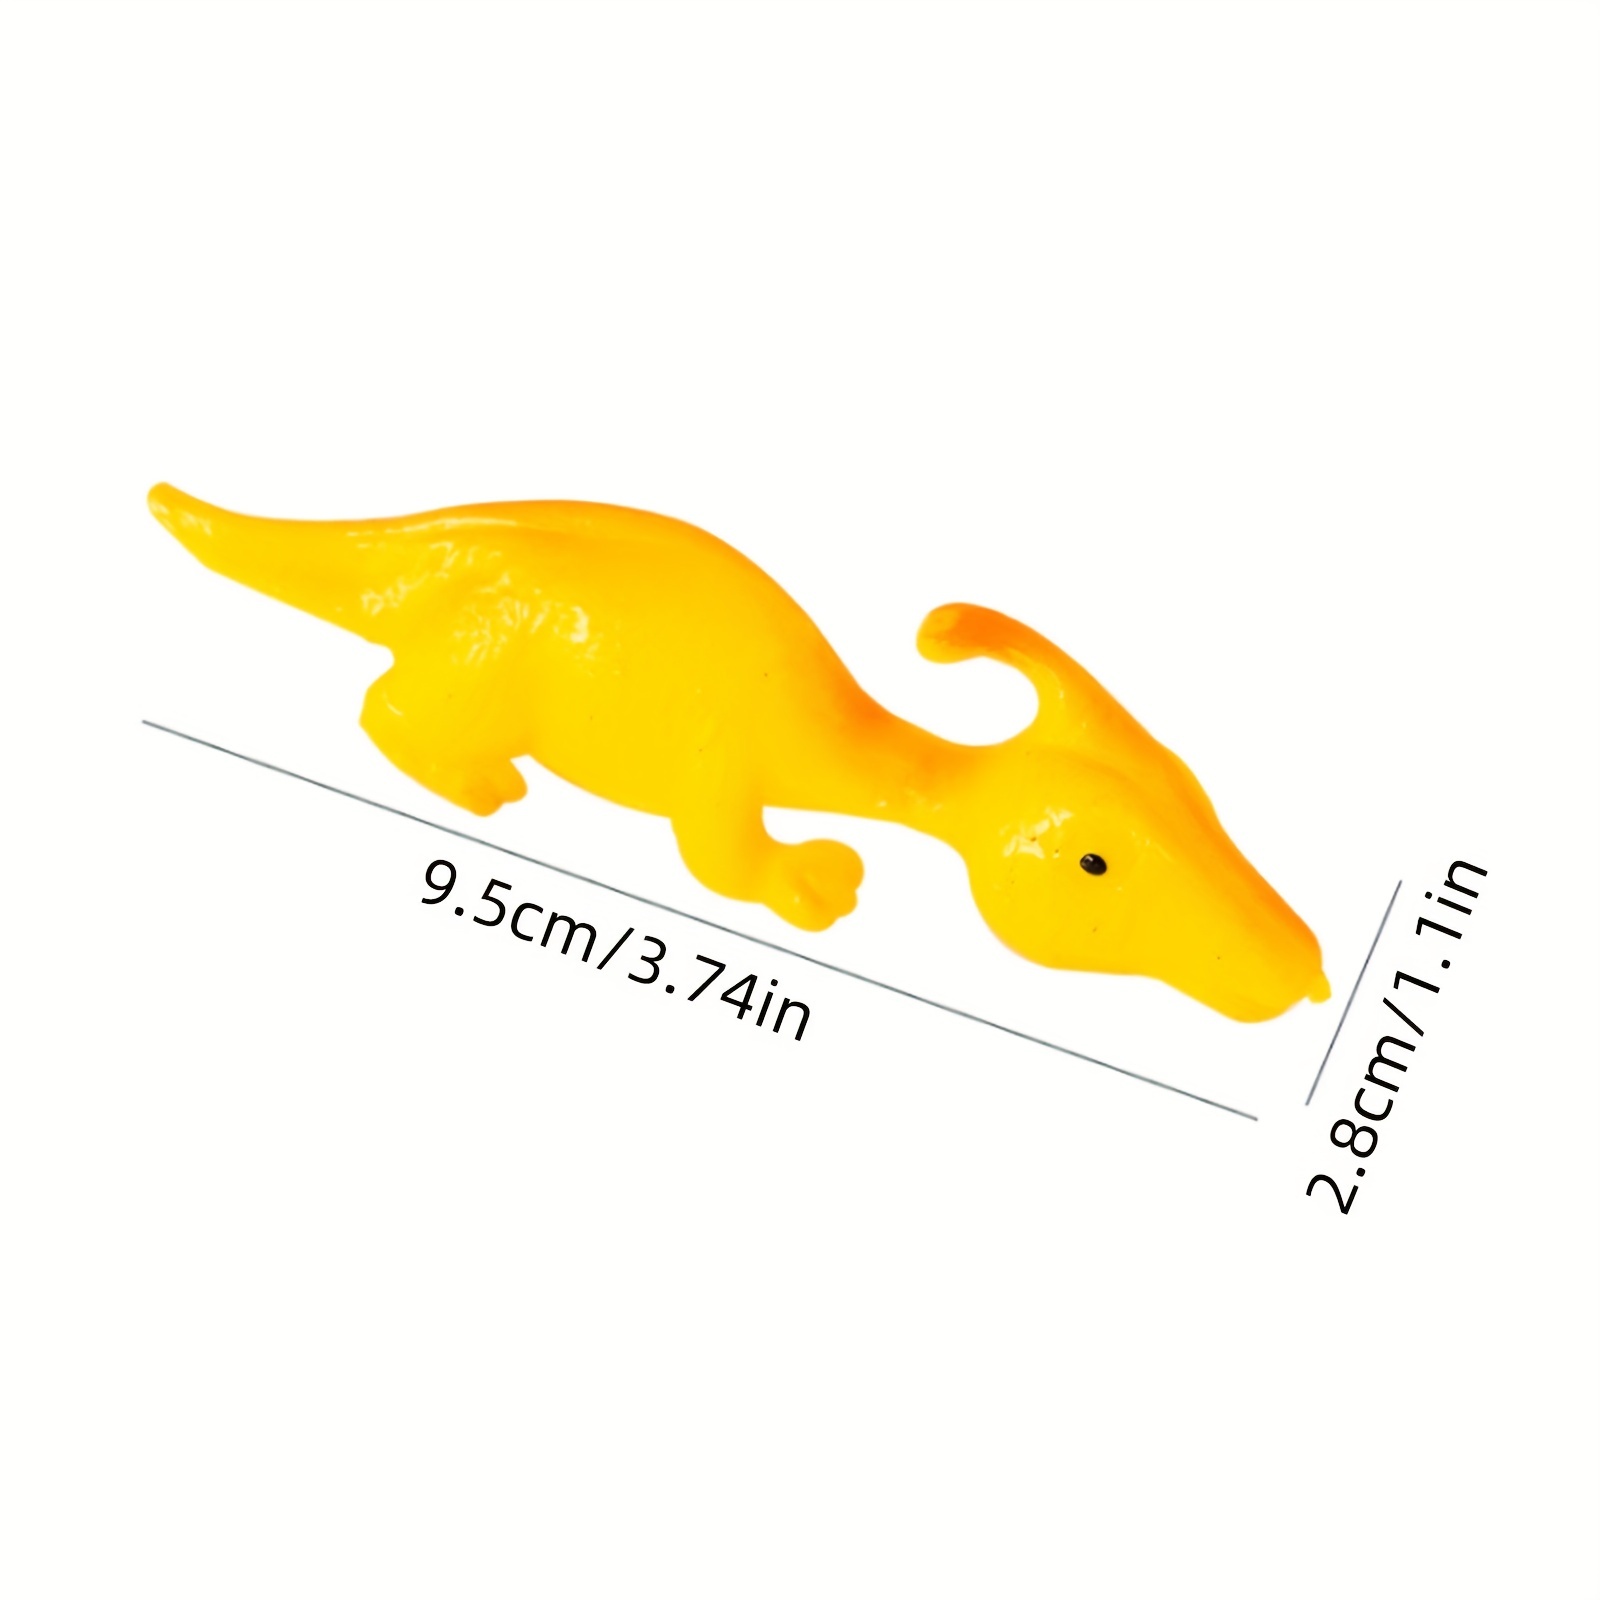 1pc Hair Catapult, Launching Dinosaurs, Fun Tricky Slingshots, Exercises,  Bouncy Flying Fingers, Sticky Decompression Toys, Funny Dinosaur Finger Toys,  Kids Party Gifts, Animals, Sticky Wall Toys Color Random